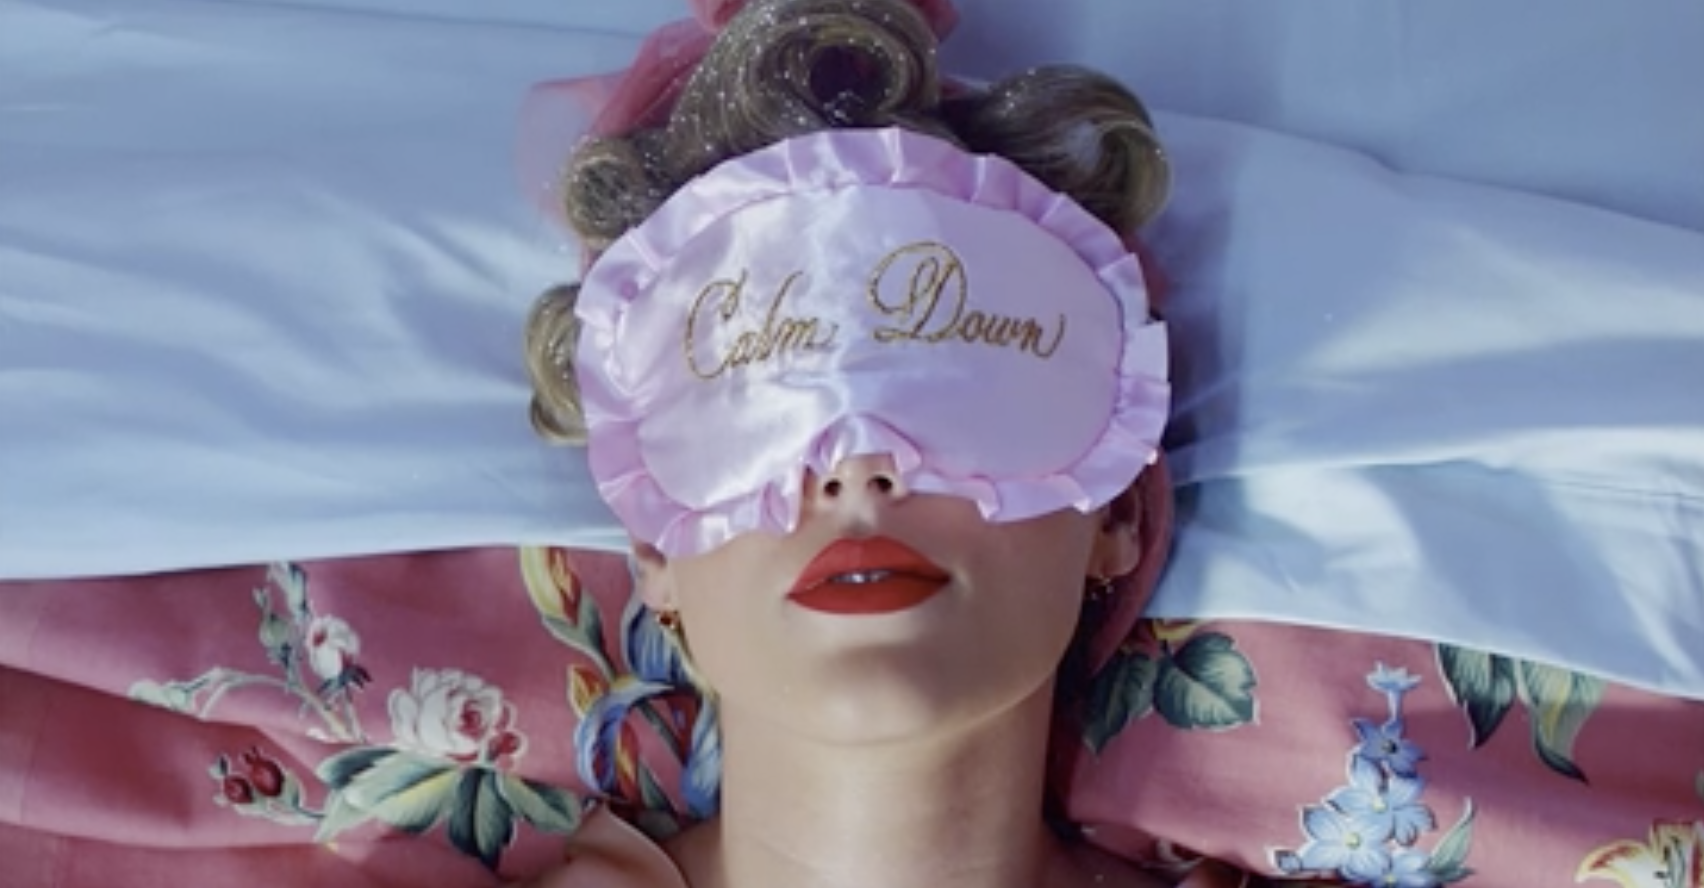 Taylor Swift wearing a sleep mask and sleeping on a bed